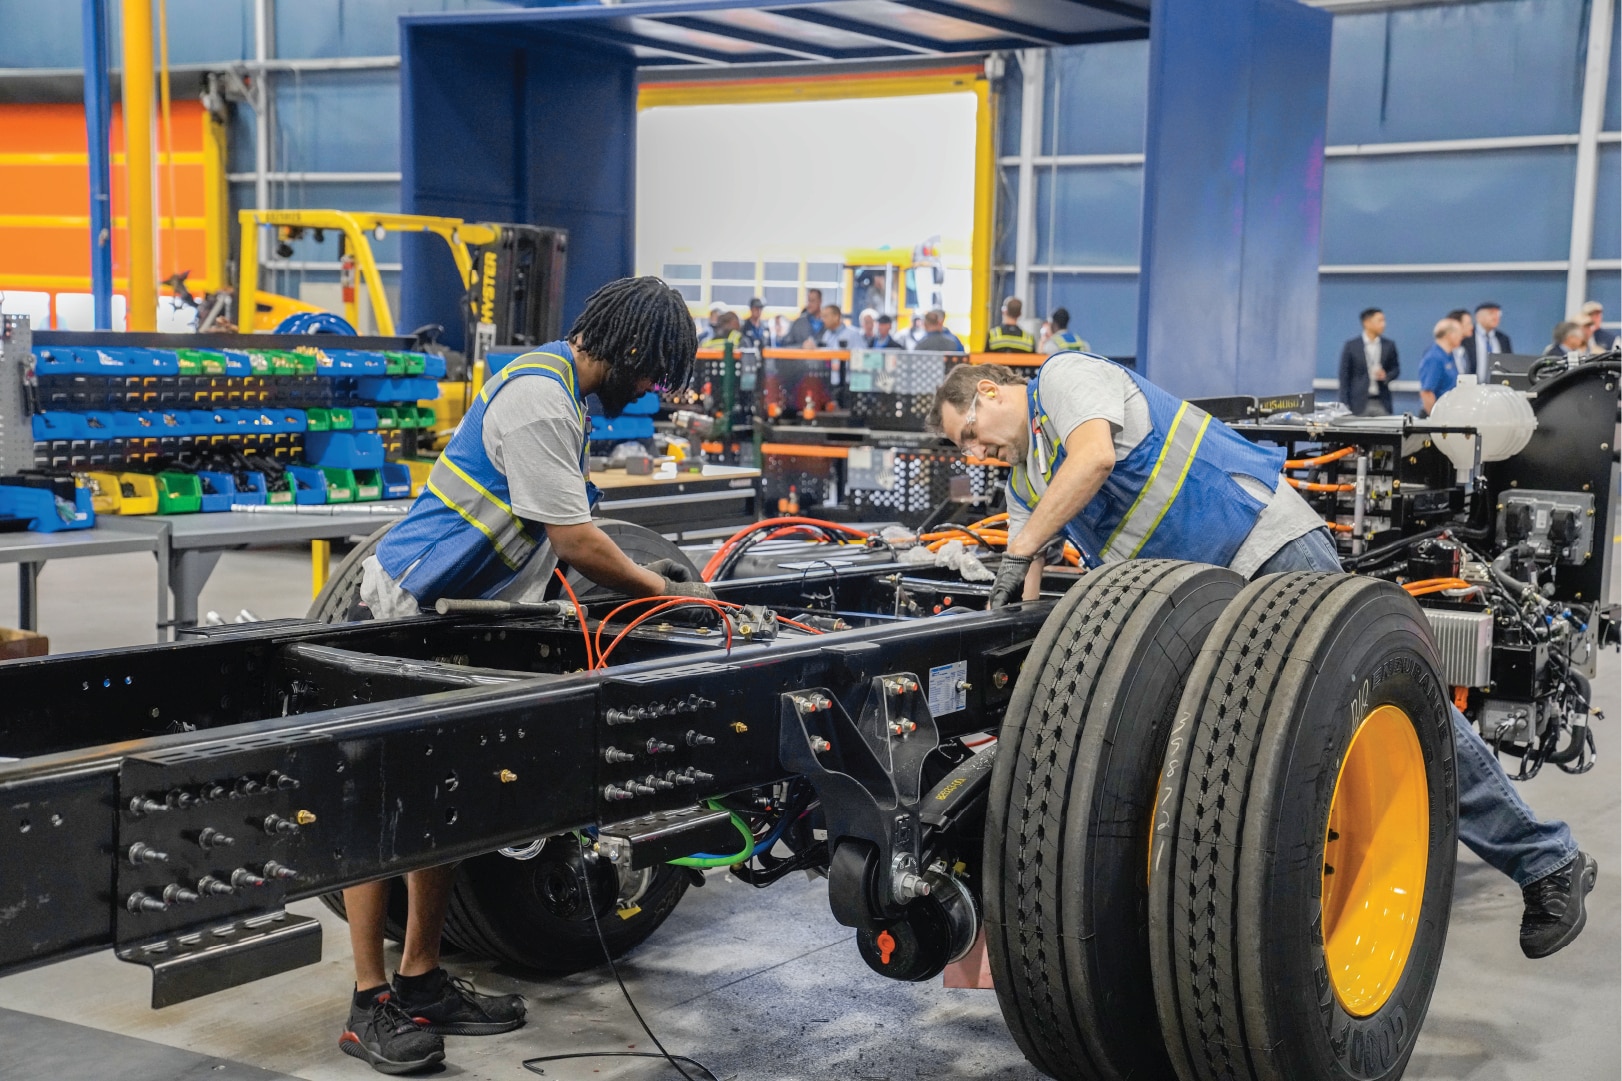 Blue Bird Corporation's New Electric Vehicle Build-Up Center: A New Era in School Bus Manufacturing